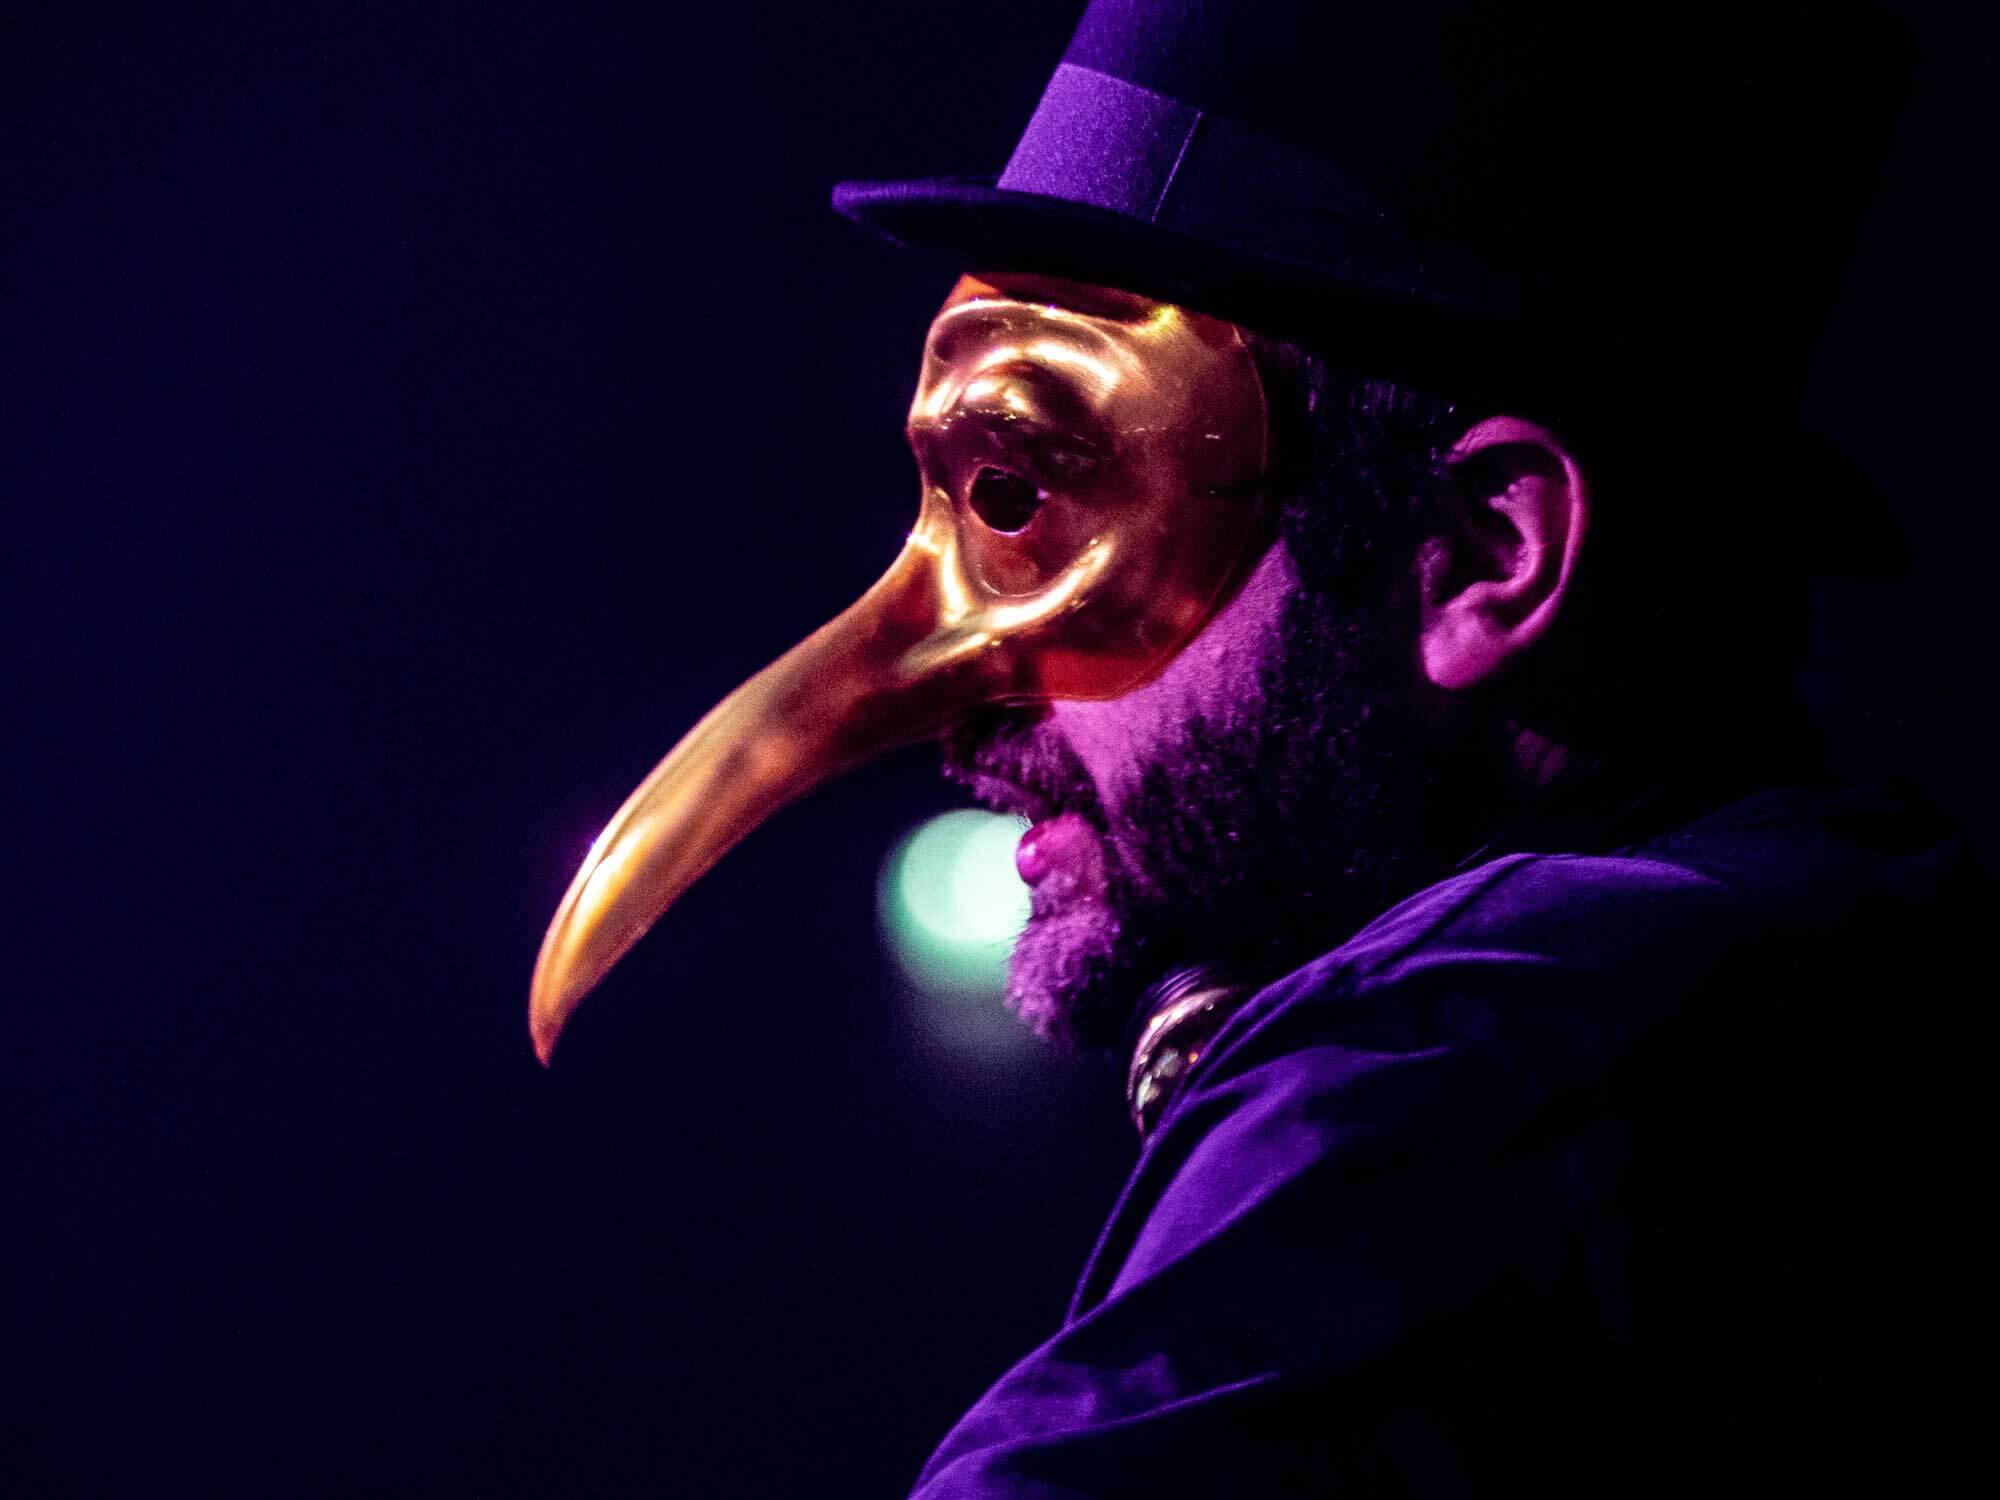 Dj Claptone performs on stage at Afas Live, Amsterdam, Netherlands 22th October 2022.